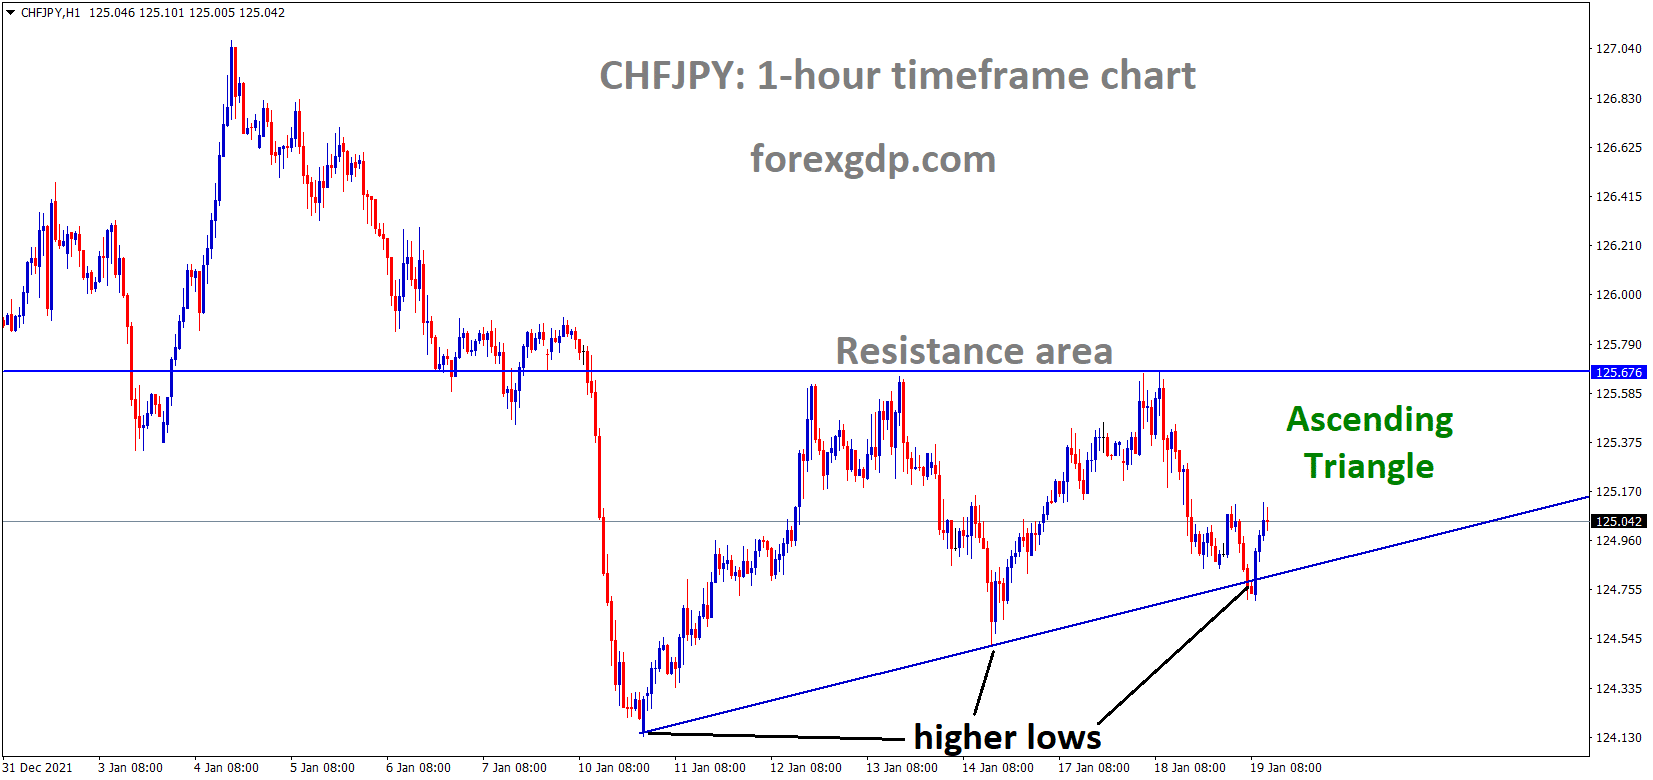 CHFJPY is moving in an ascending triangle pattern and the market has rebounded from the higher low area of the triangle pattern